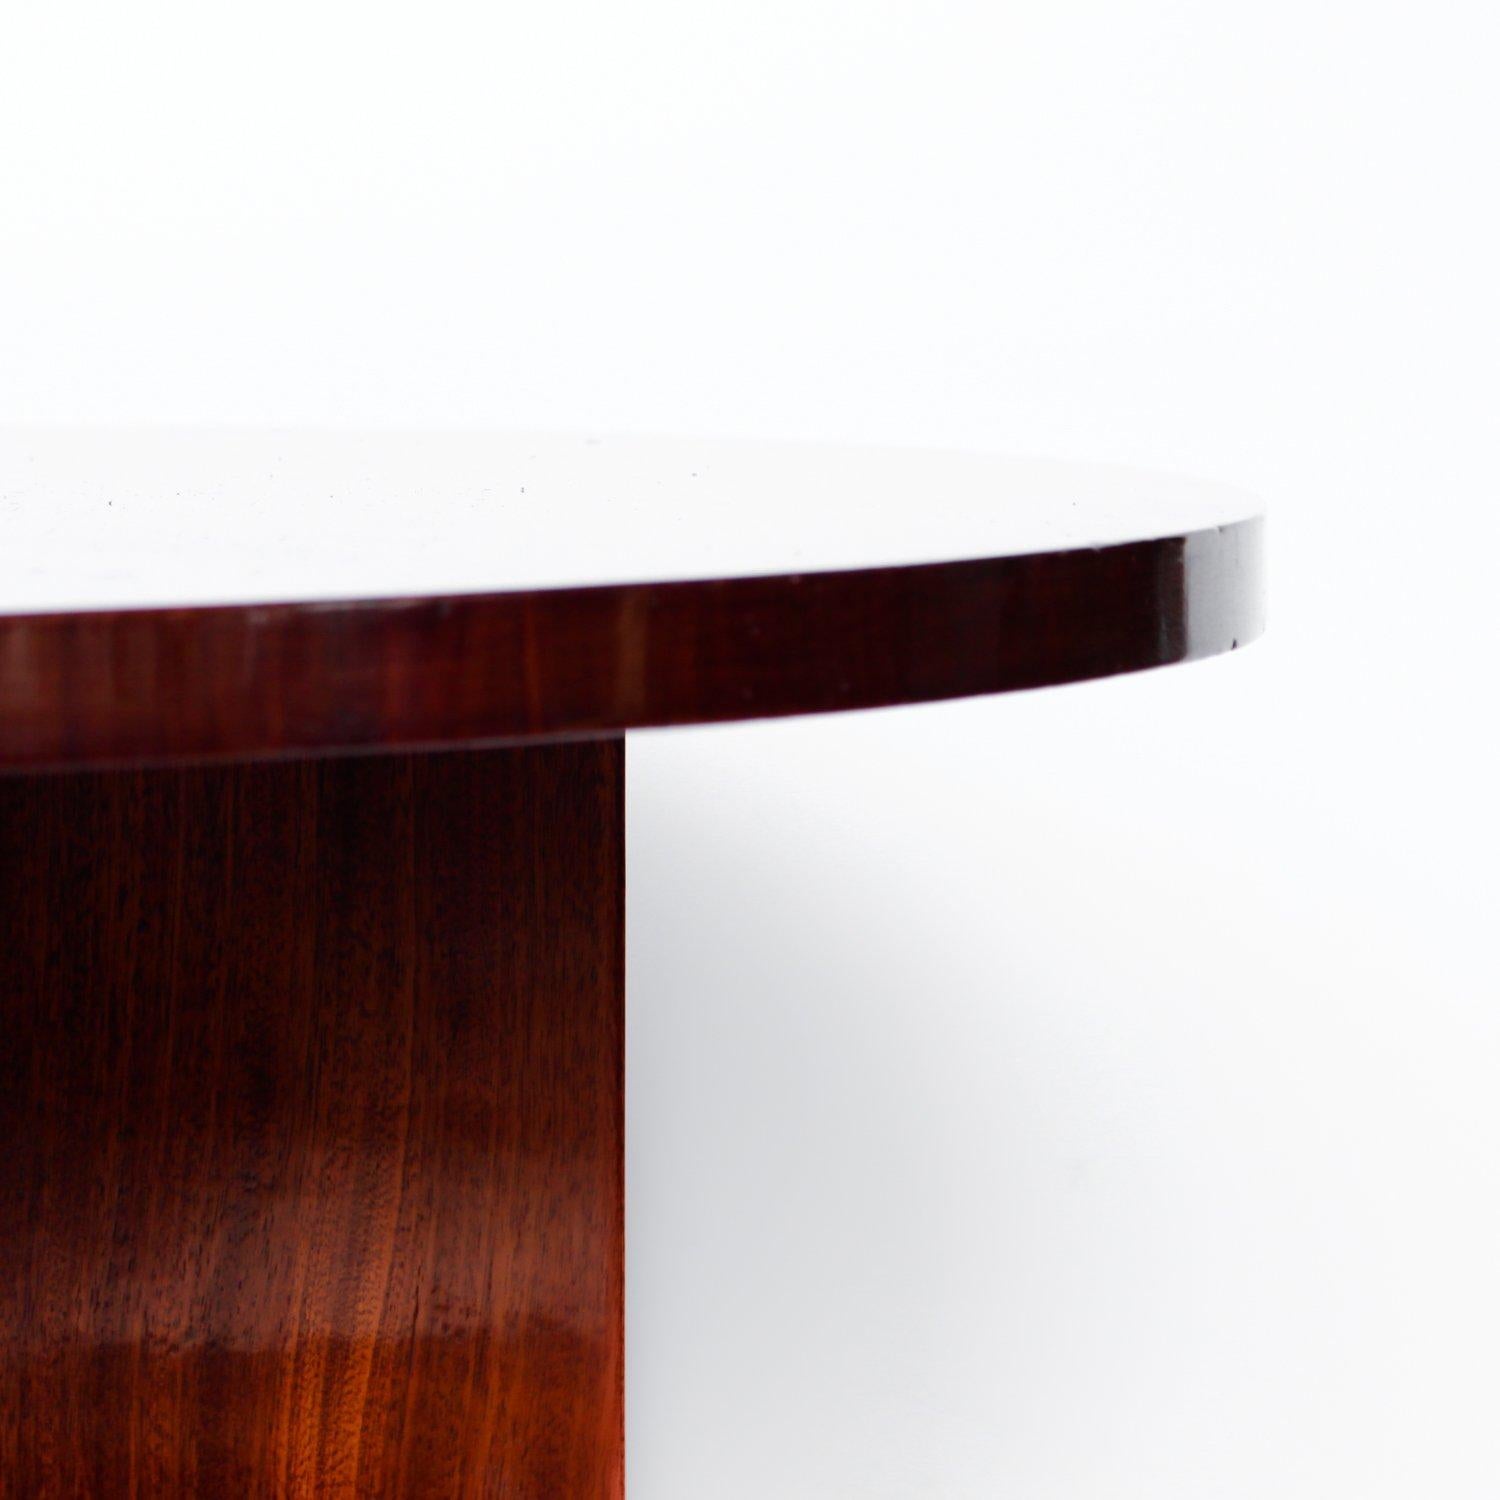 Polished Art Deco Side Table, Walnut and Maccassar Ebony, French, circa 1925 For Sale